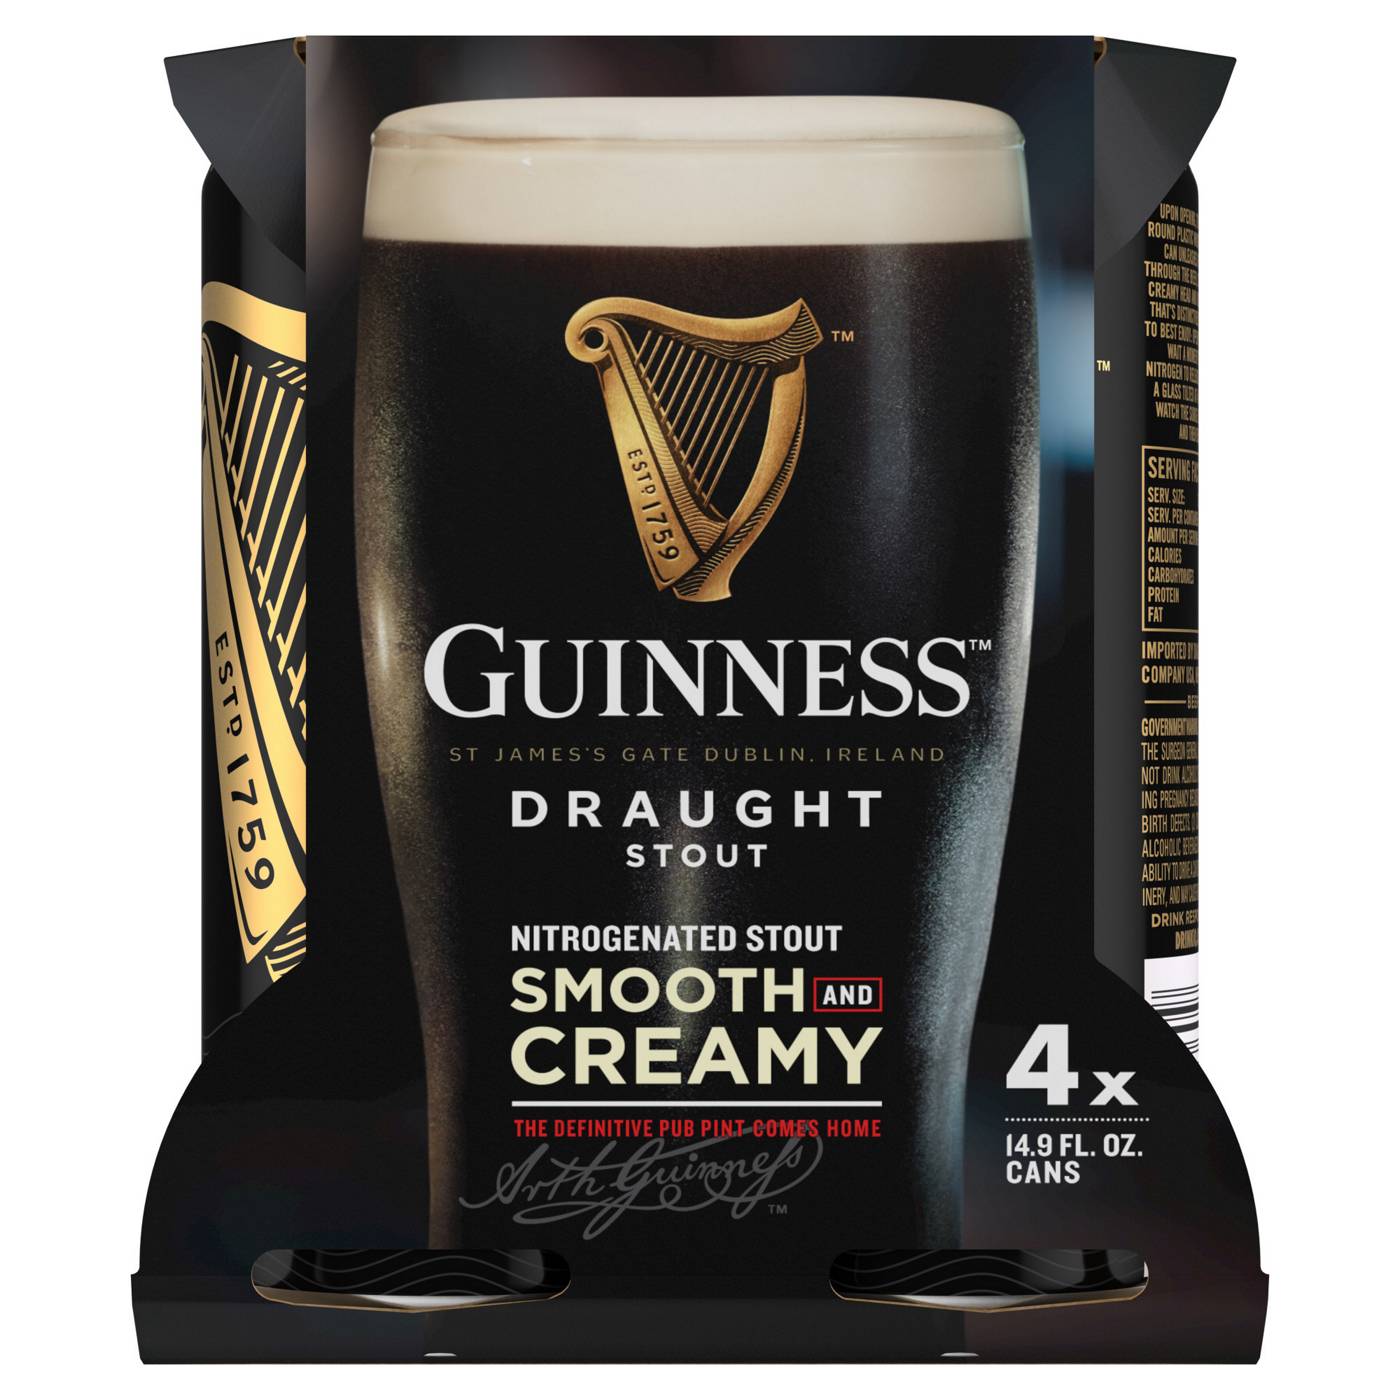 Guinness Draught Stout Beer; image 1 of 4